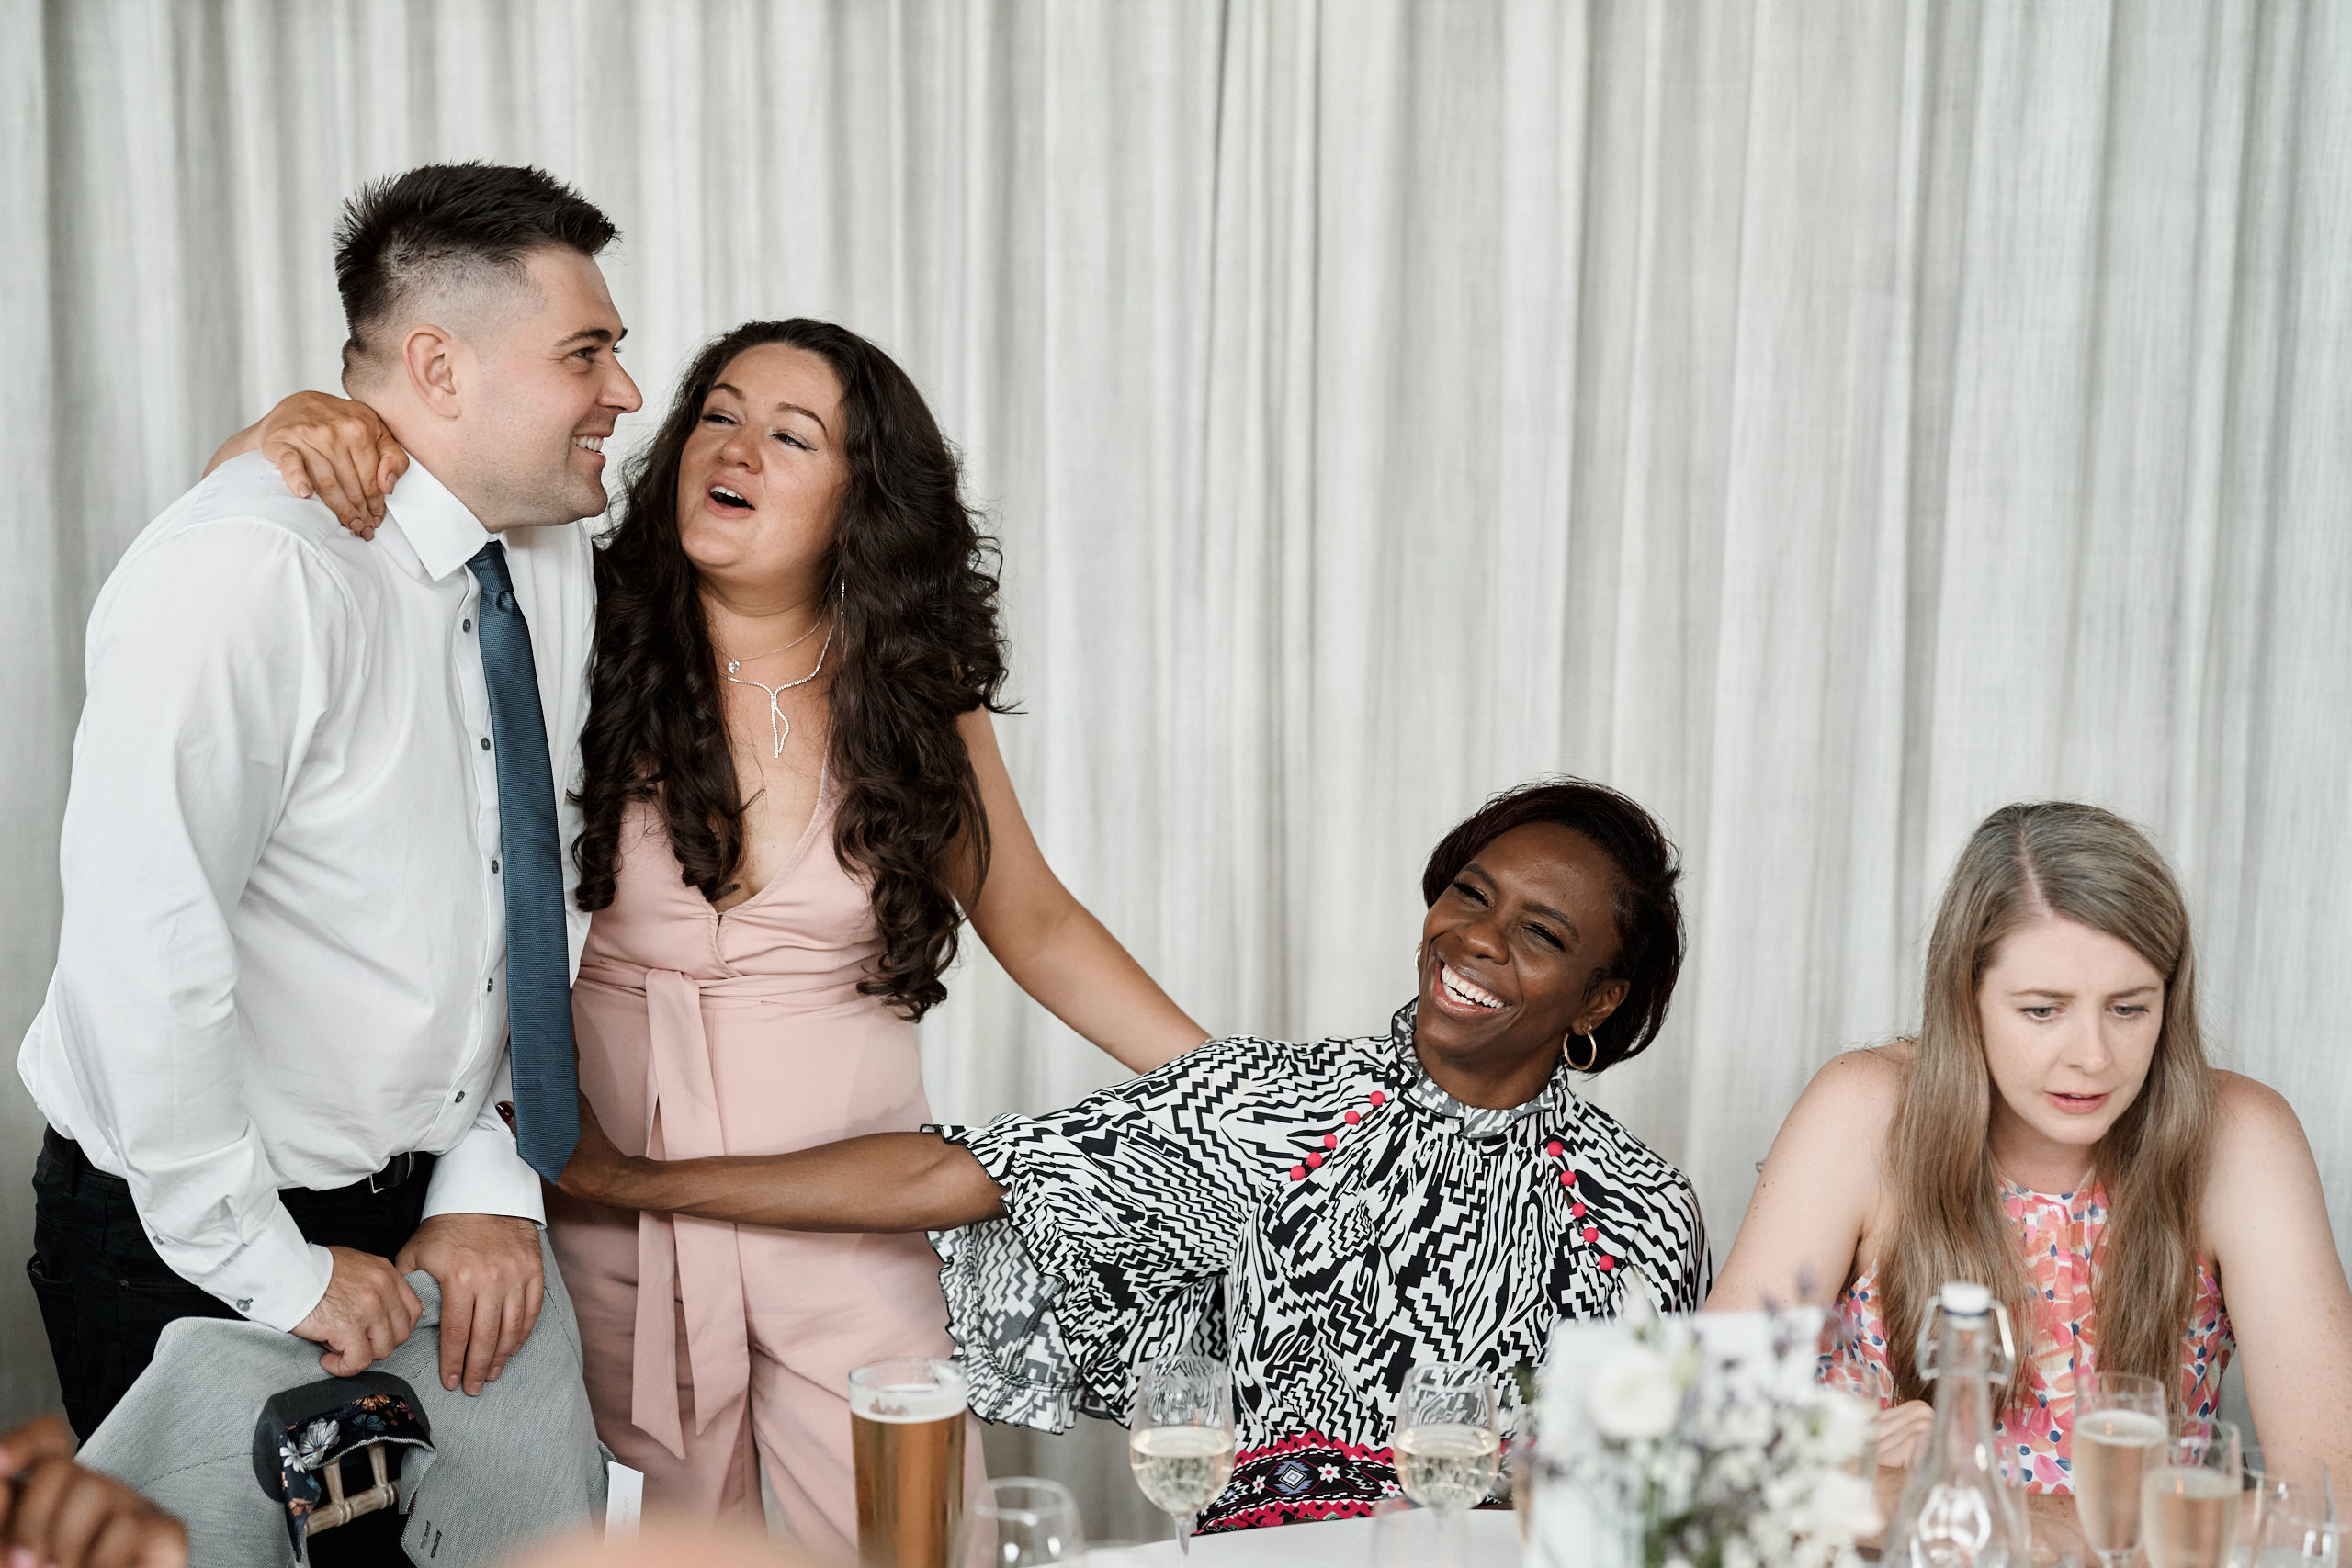 Some folks cracking up at a wedding party.